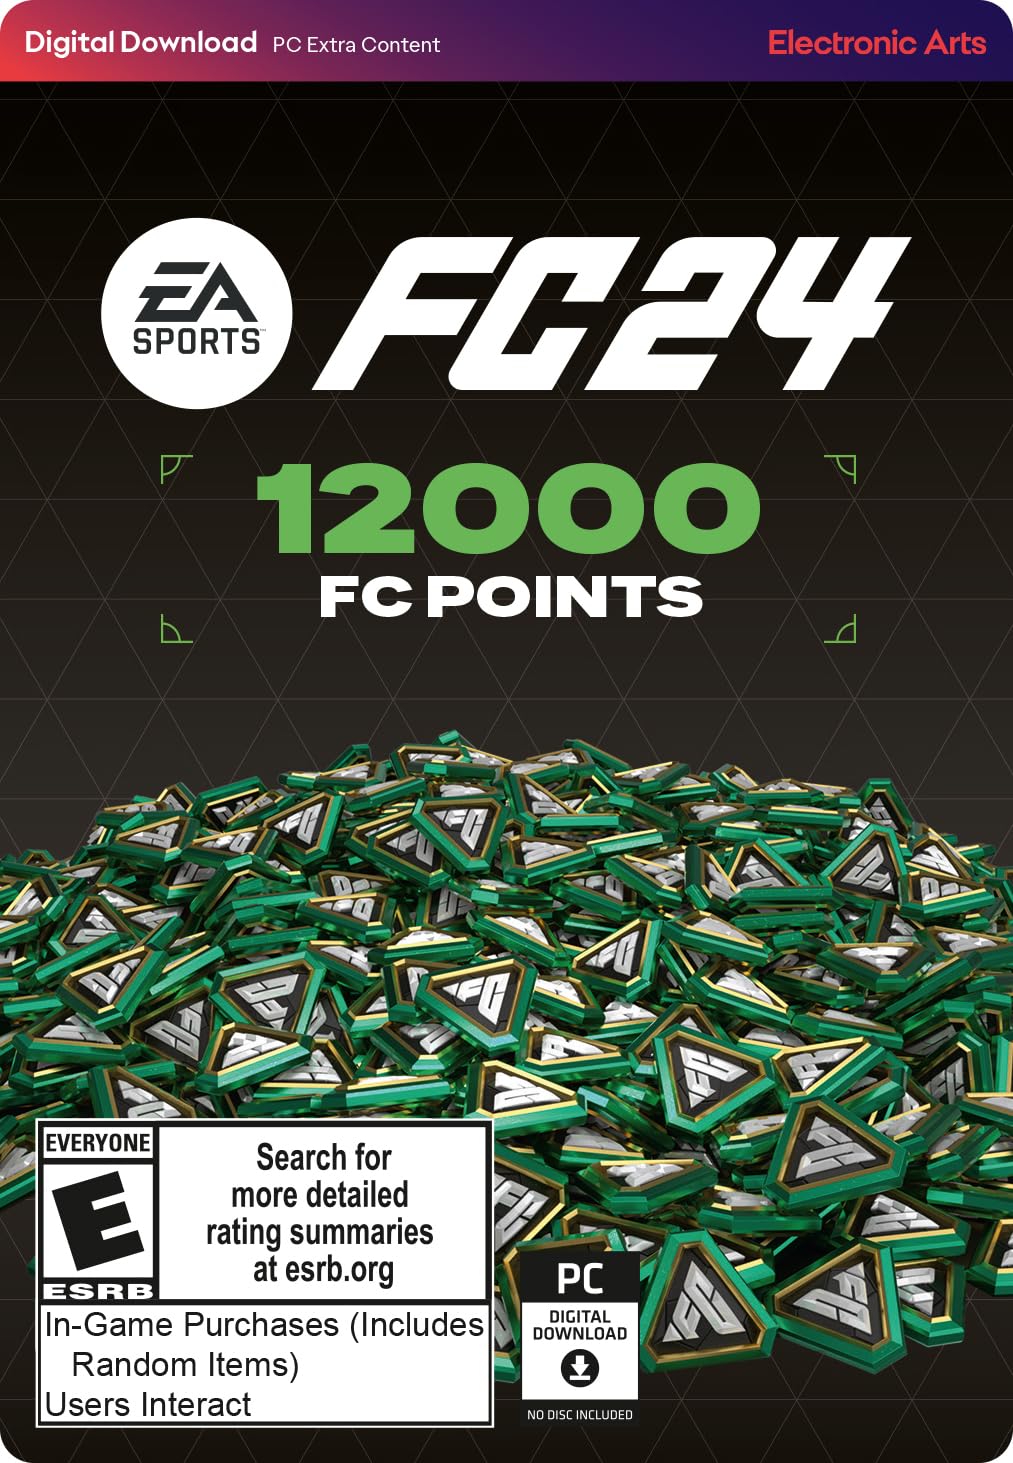 EA SPORTS FC 24 - 12000 Points - PC [Online Game Code]